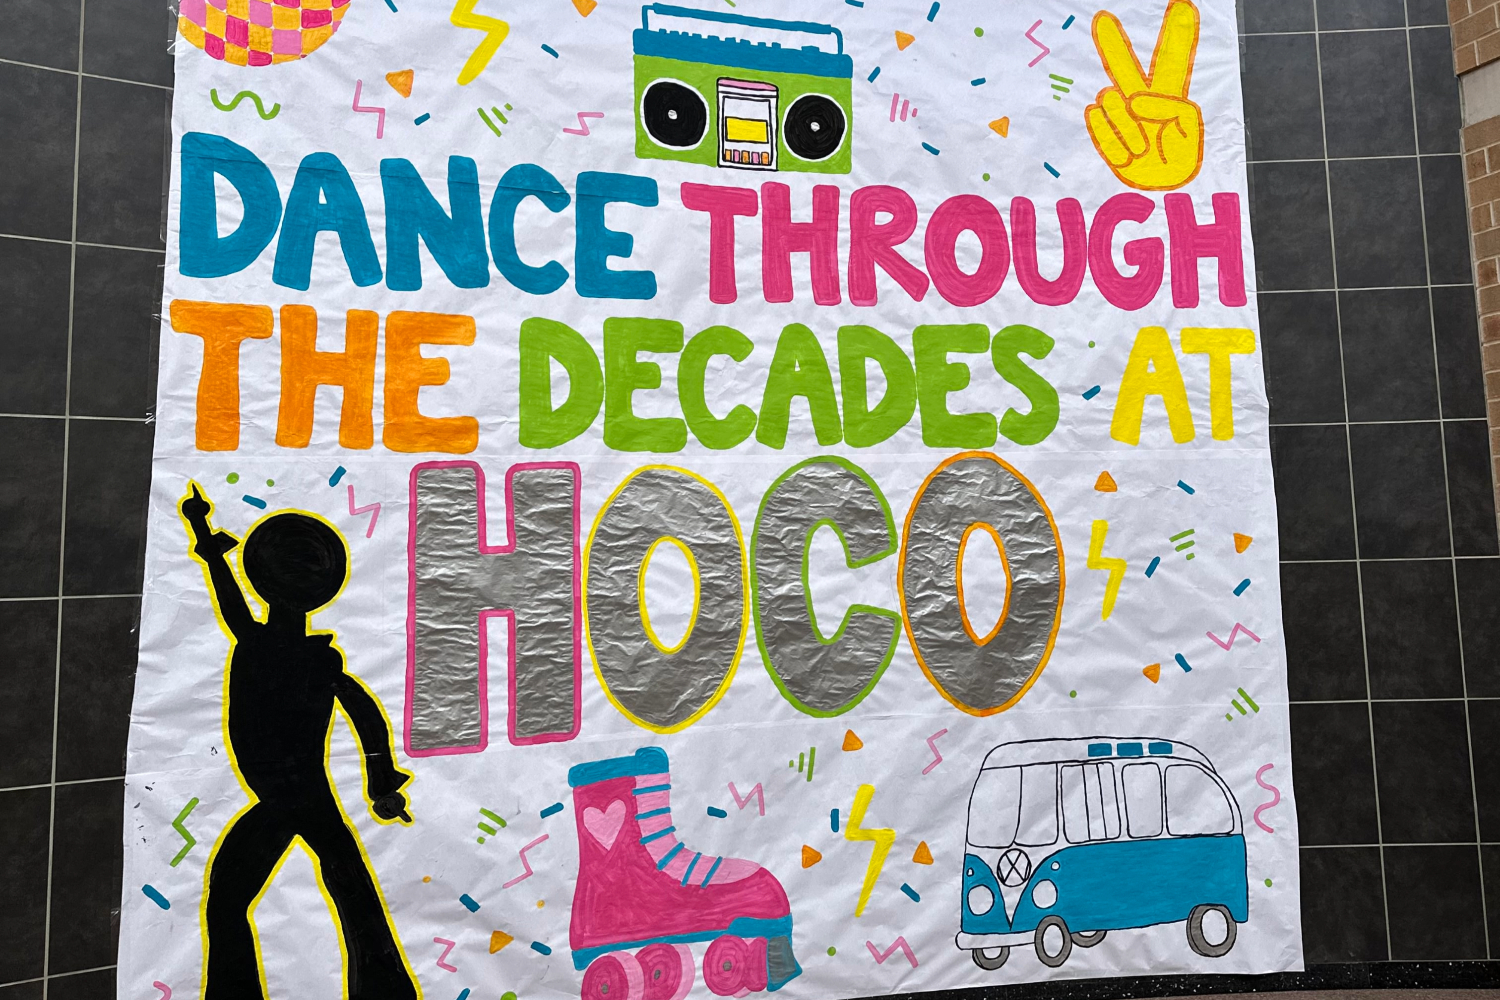 The wait for the annual Homecoming dance is over. Students can enjoy dancing through the decades on Saturday from 7-10 p.m at The Nest.